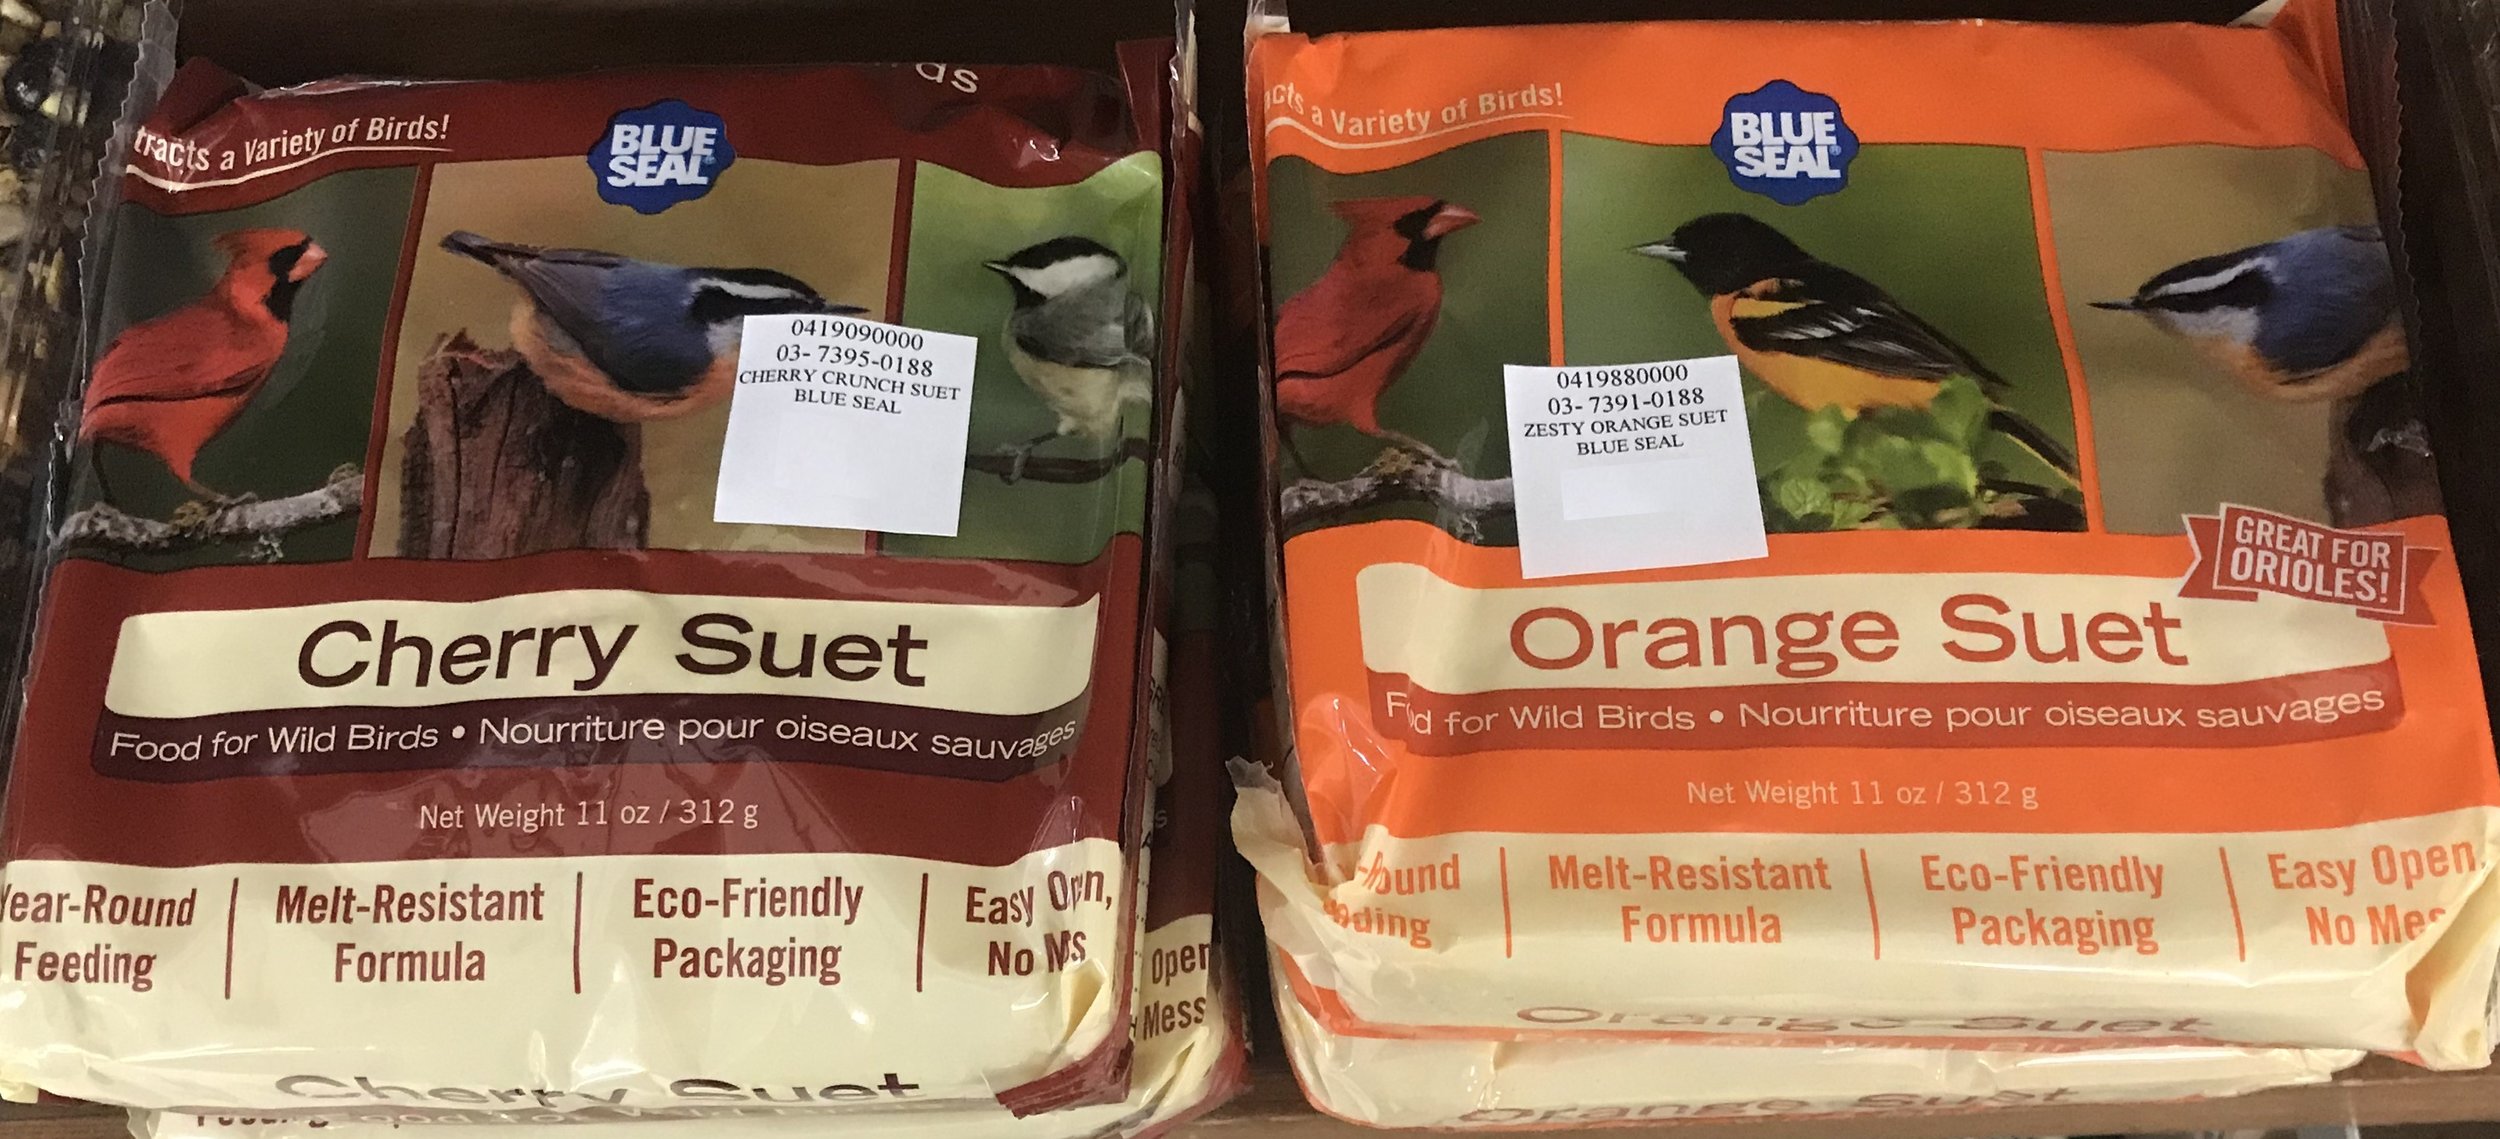  We carry a full line of Blue Seal Suet 